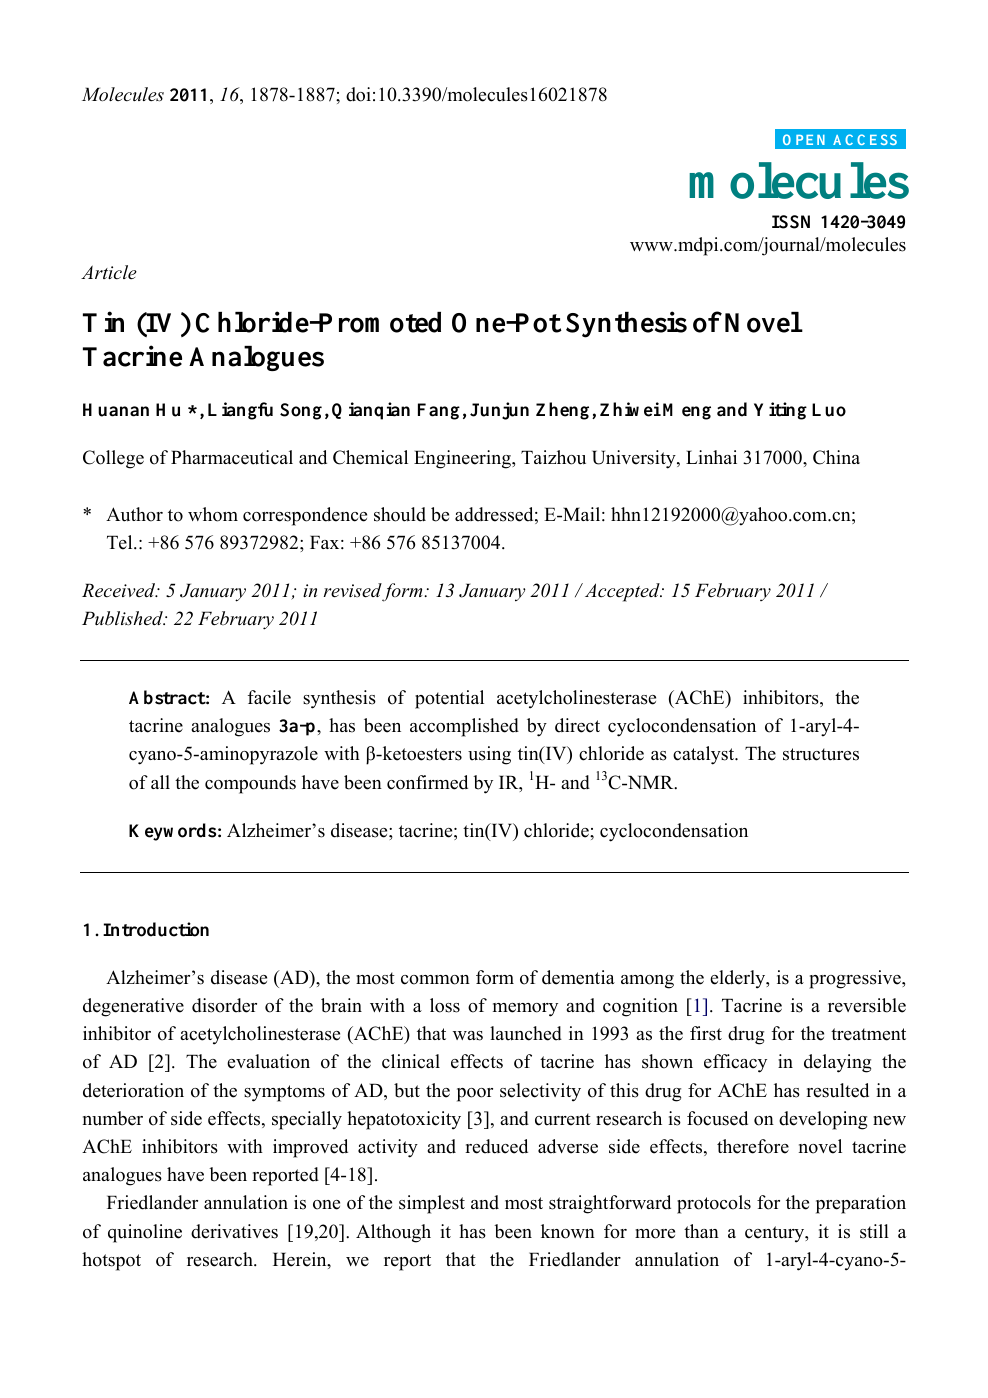 Tin Iv Chloride Promoted One Pot Synthesis Of Novel Tacrine Analogues Topic Of Research Paper In Chemical Sciences Download Scholarly Article Pdf And Read For Free On Cyberleninka Open Science Hub